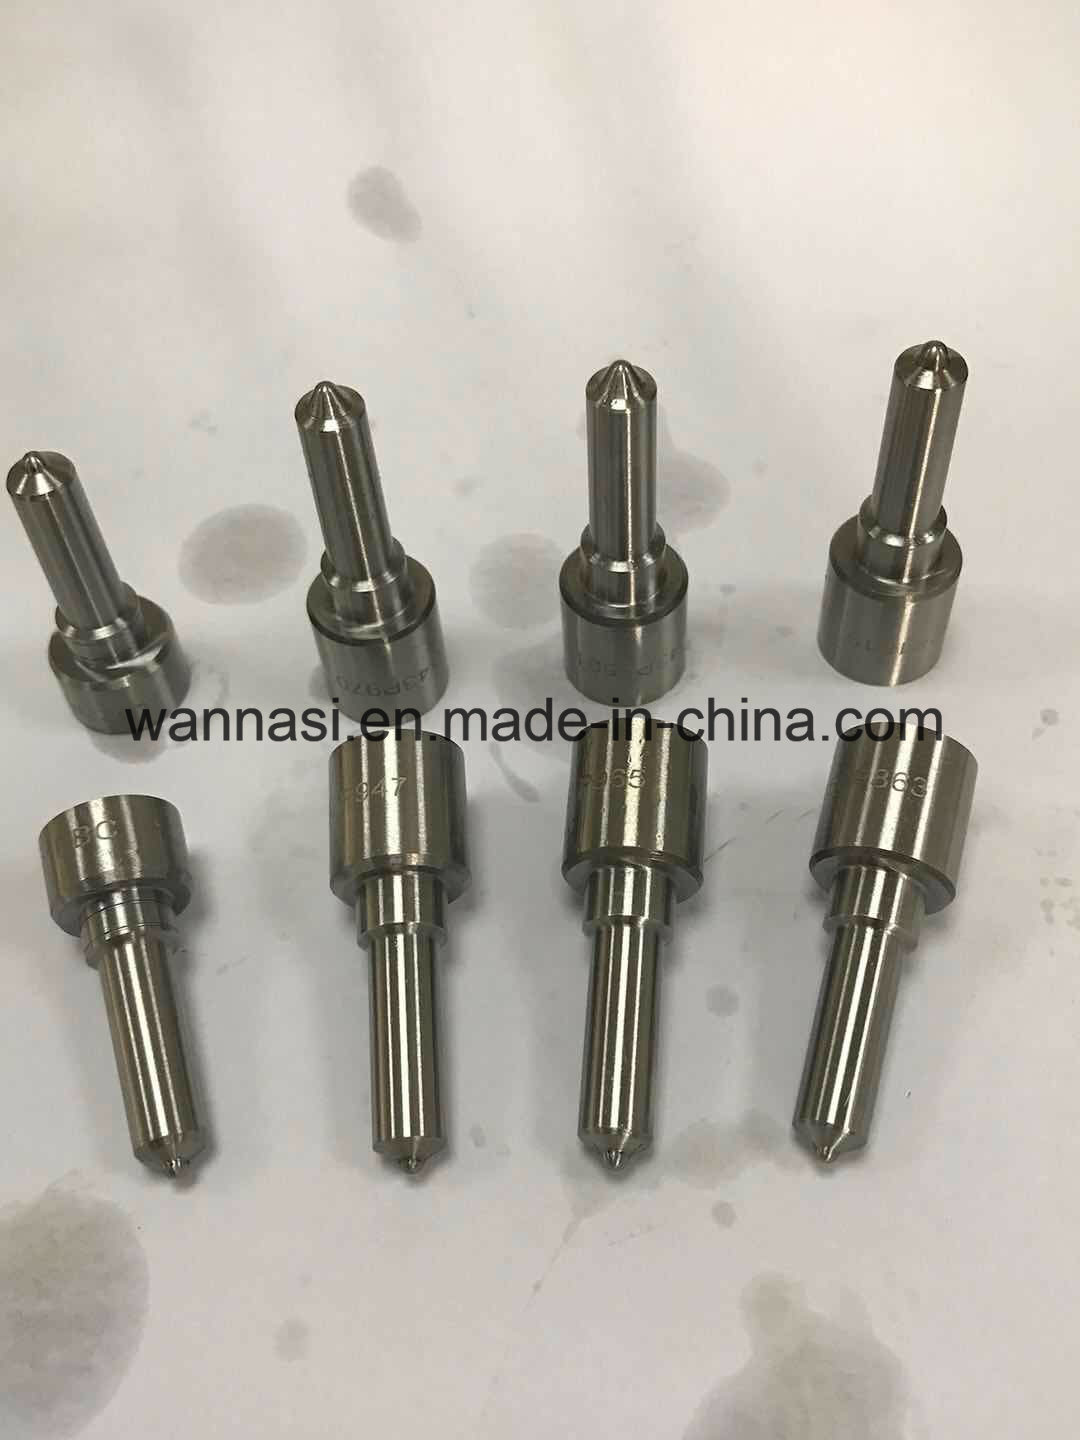 Fuel Diesel System Common Rail Denso Nozzle Dlla155p840 for Injector 095000-6521